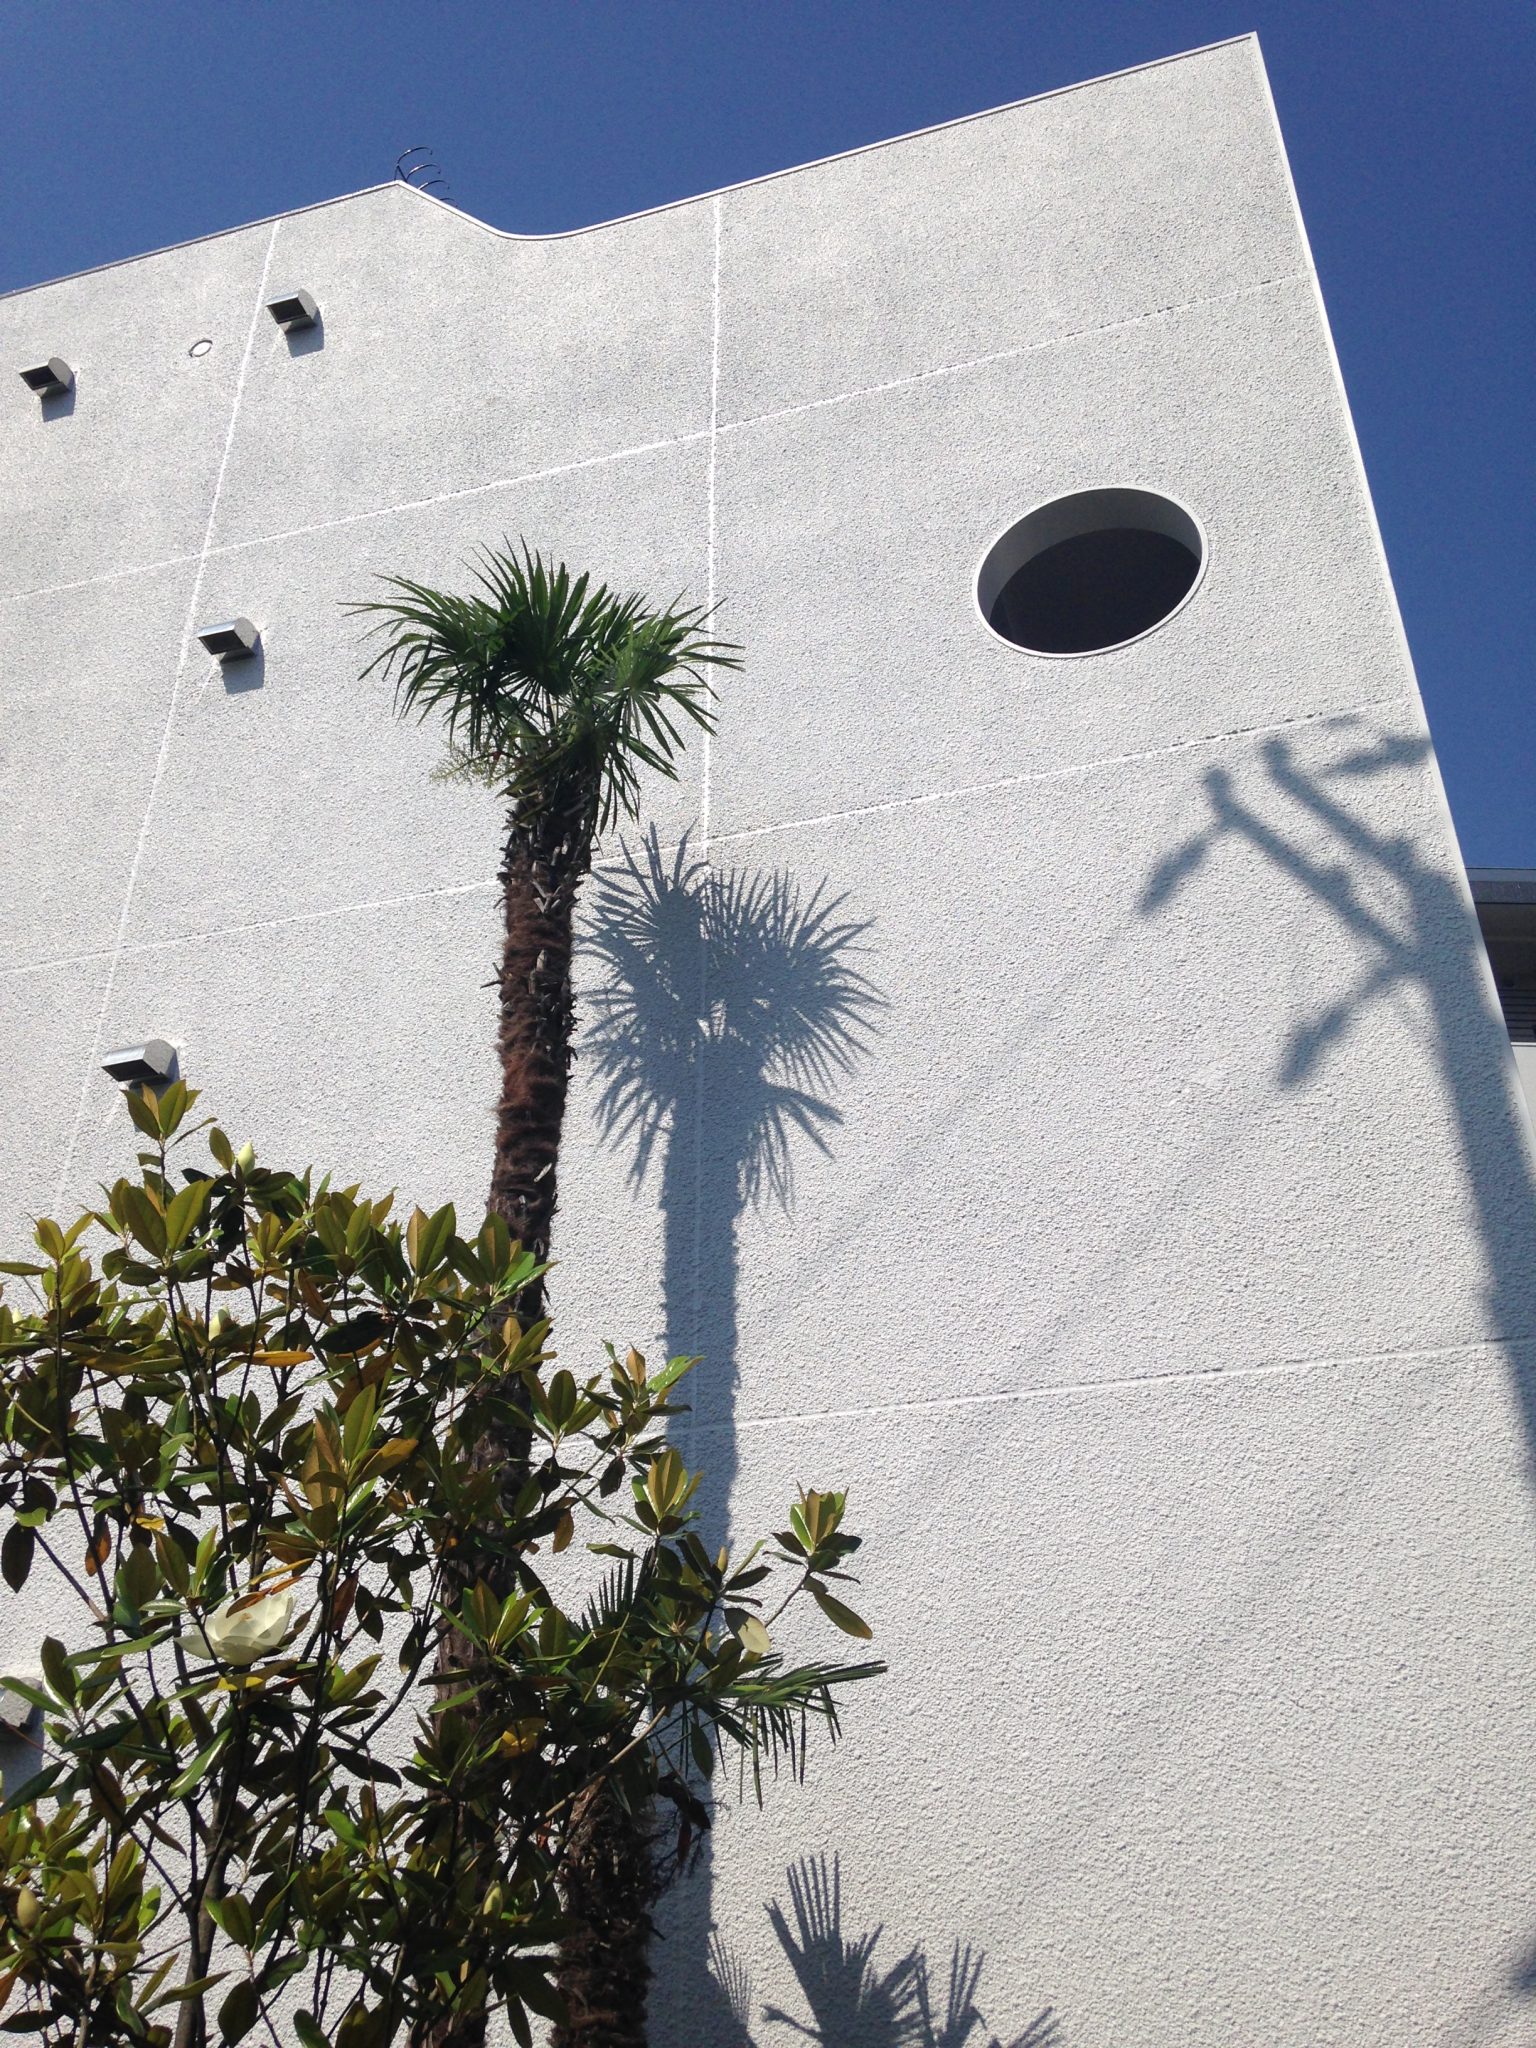 Plants throwing a shadow on a white building